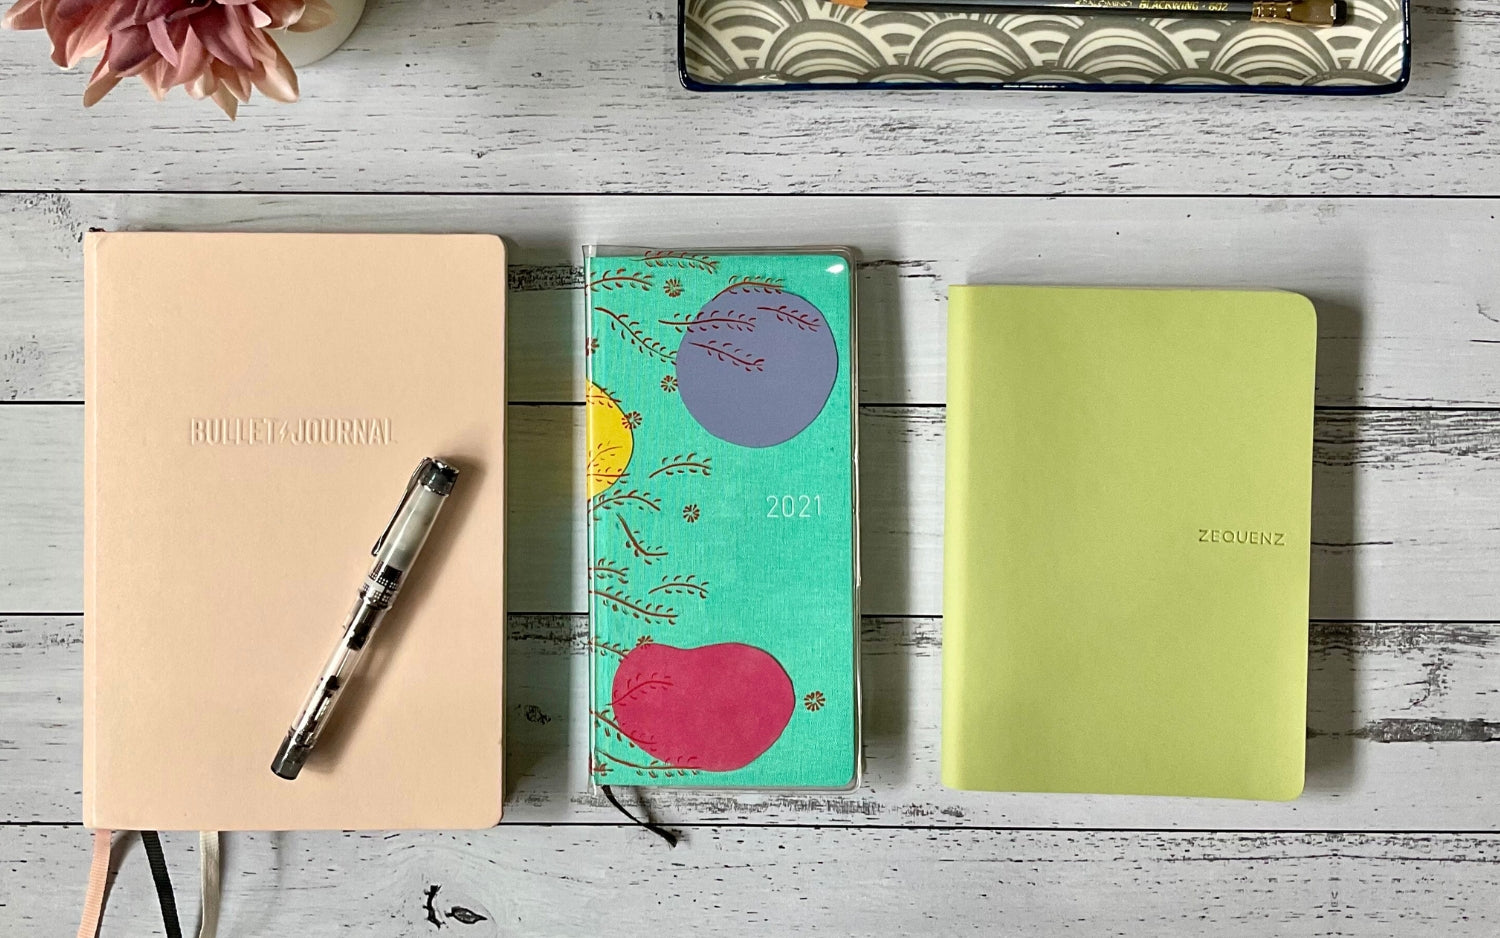 Creative Bullet Journal Ideas for Gardening and Organization